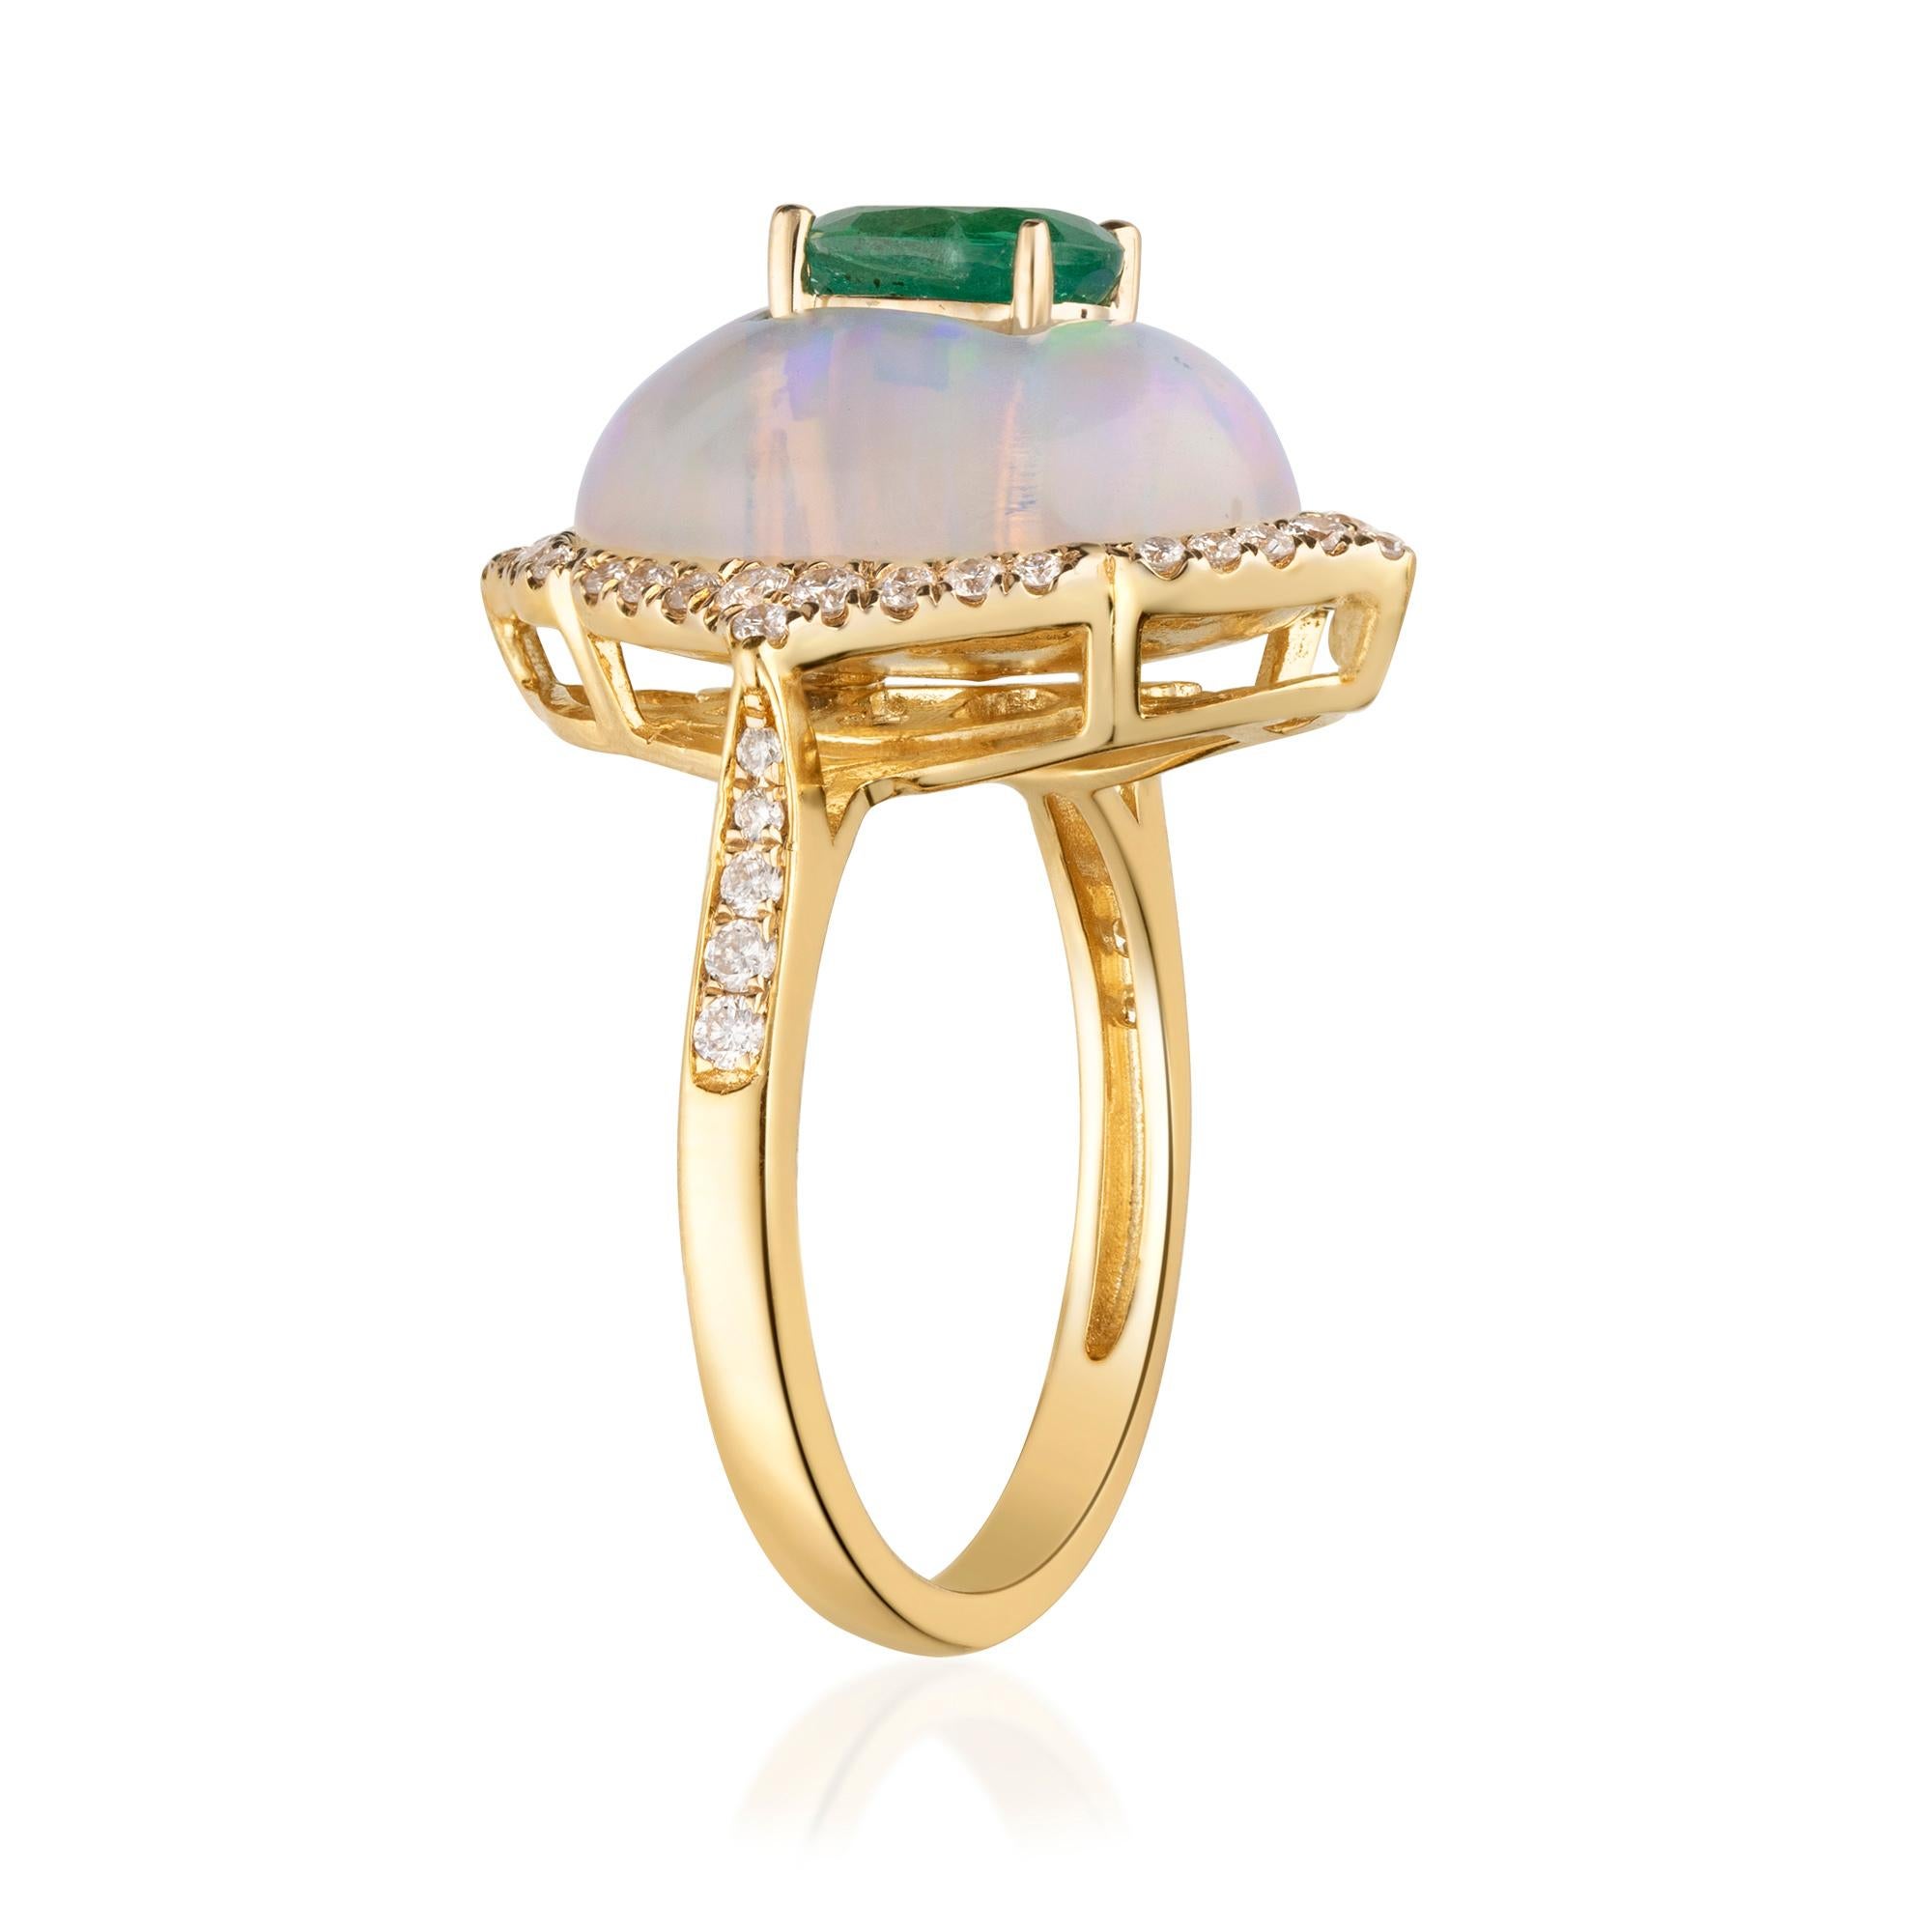 This beautiful Emerald Ring is crafted in 14-karat Yellow gold and features a 4/5 carat 1 Pc Natural Emerald, 1 Pc Opal 5.63 Carats and  46 Pcs Round White Diamonds in GH- I1 quality with 0.35 Ct in a prong-setting. This Ring comes in sizes 6 to 9,